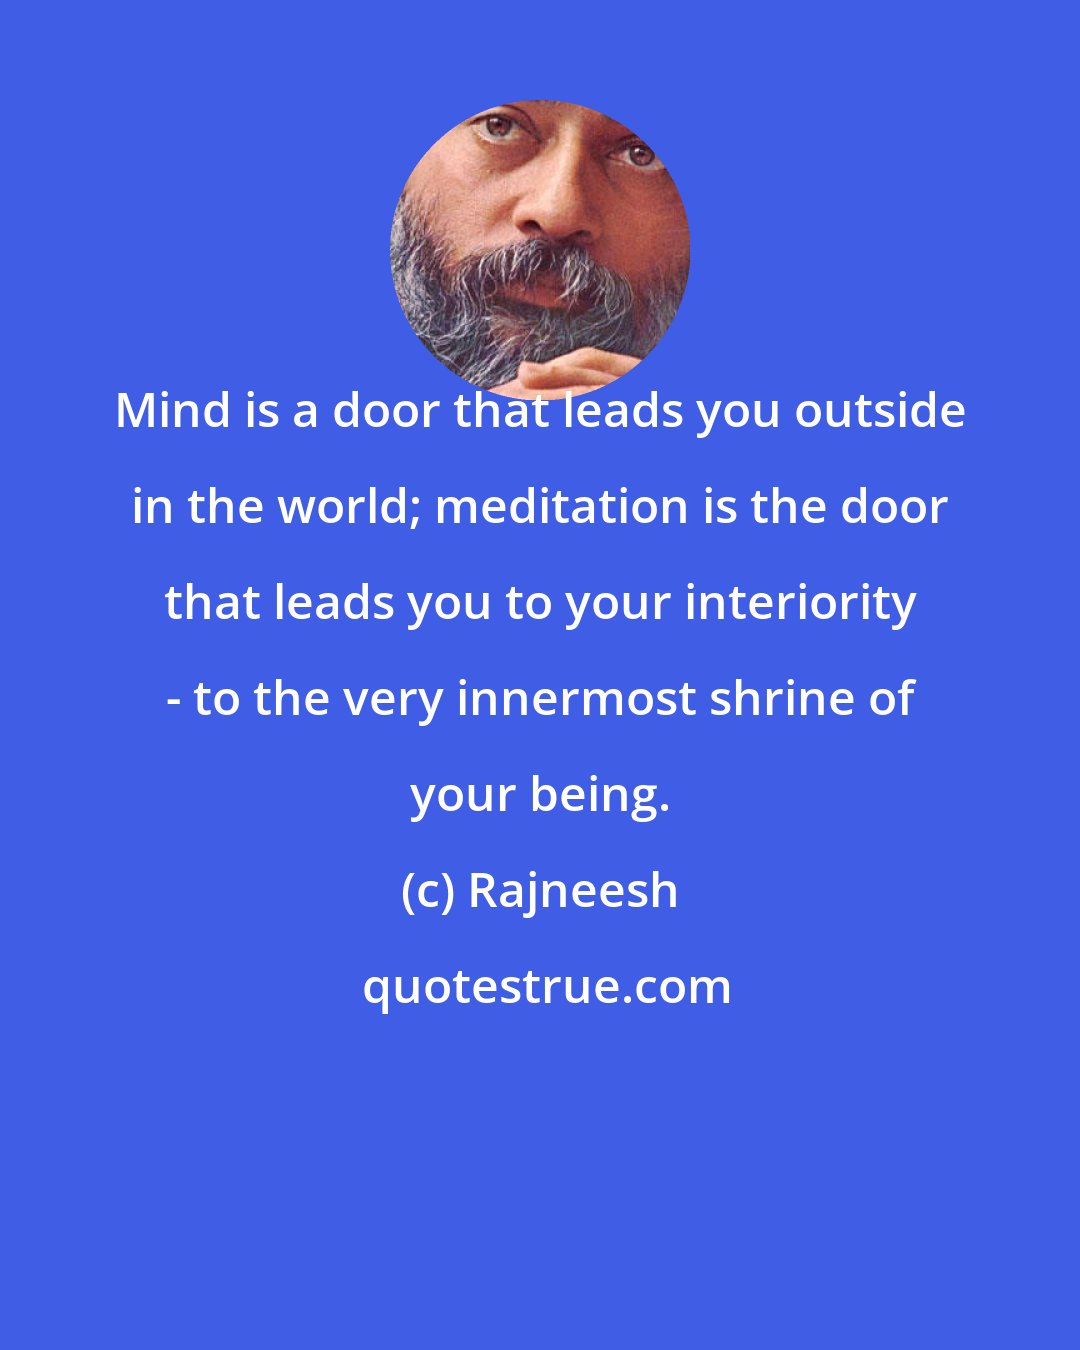 Rajneesh: Mind is a door that leads you outside in the world; meditation is the door that leads you to your interiority - to the very innermost shrine of your being.